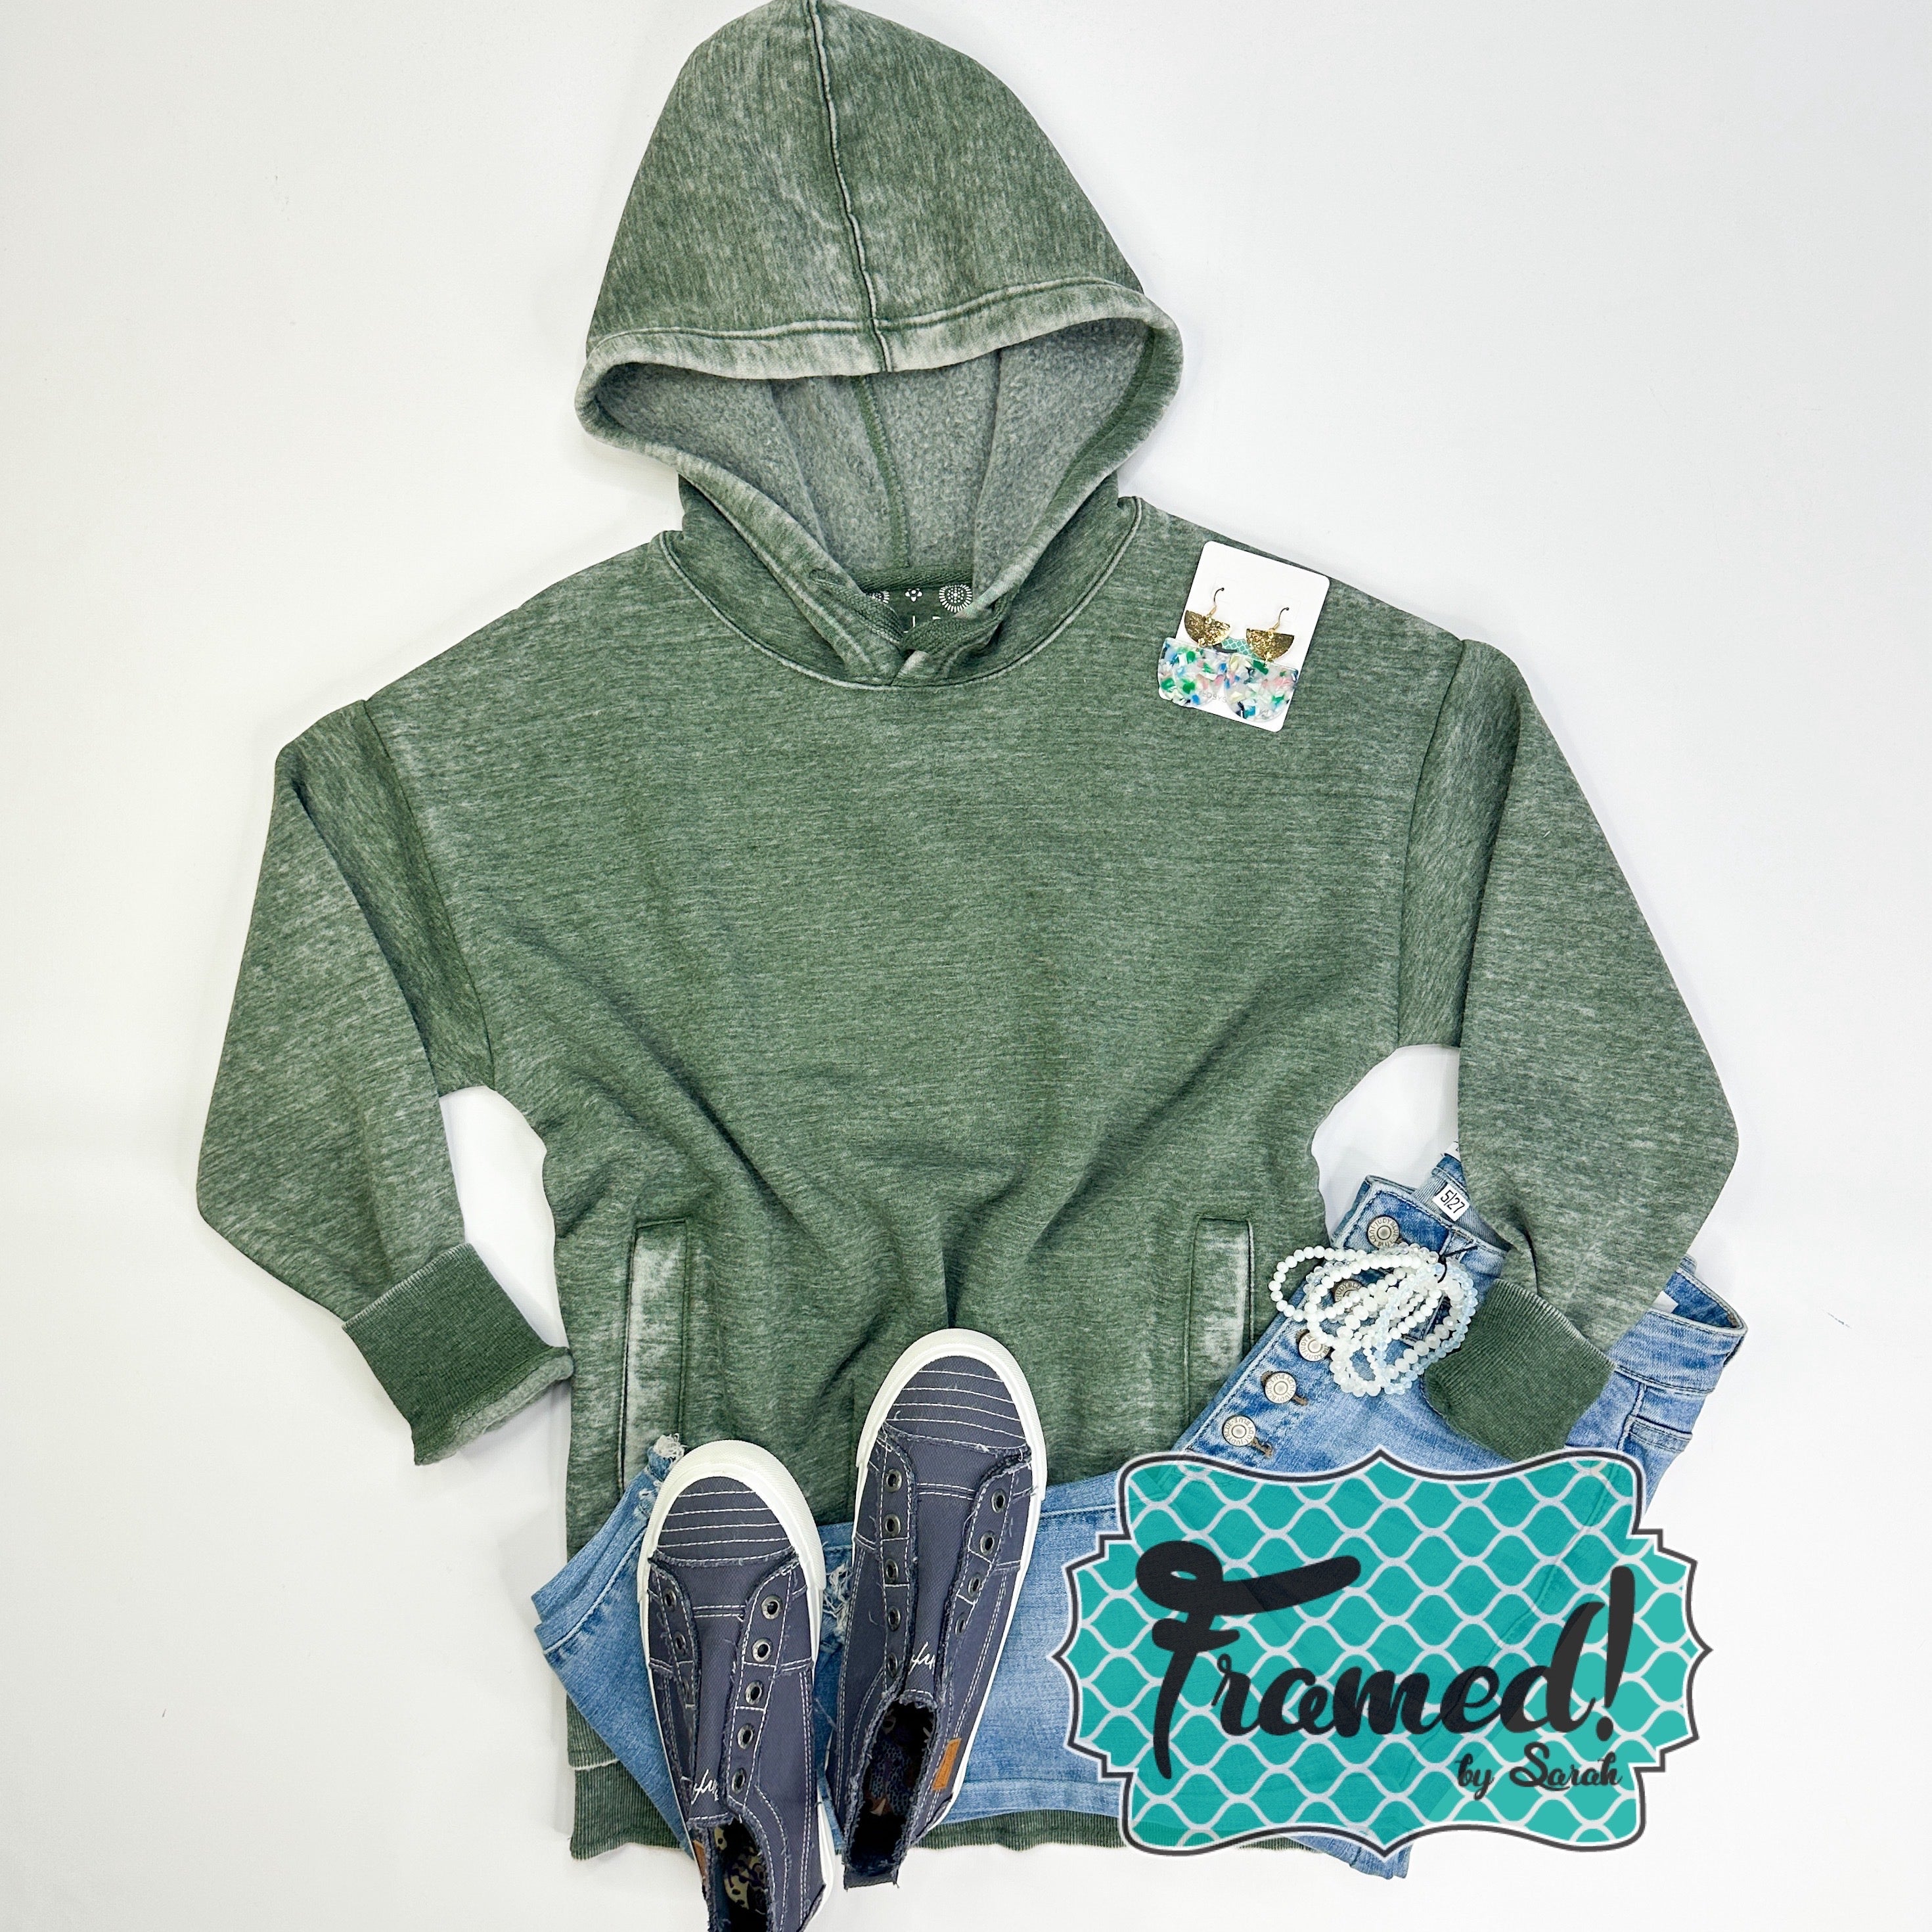 Green Vintage Wash Fleece Hooded Pullover (Sm, Md only)